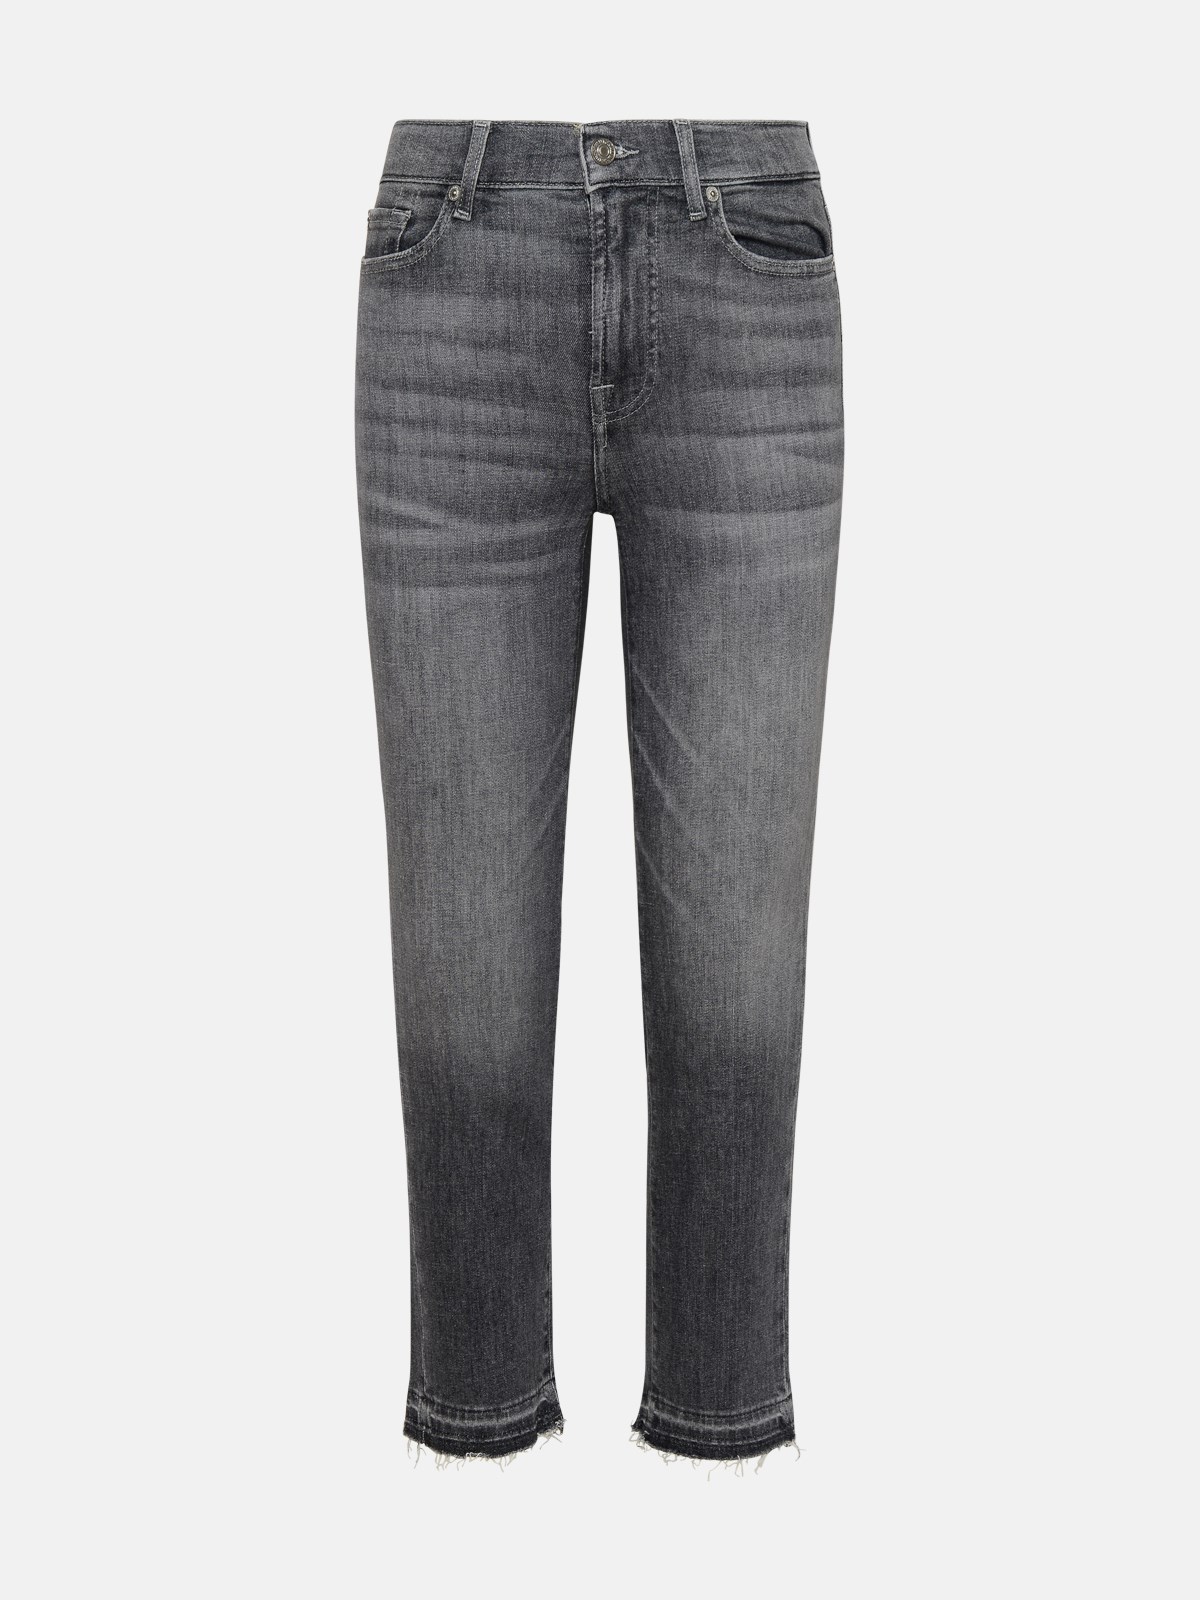 7 For All Mankind The Straight Grey Cotton Jeans